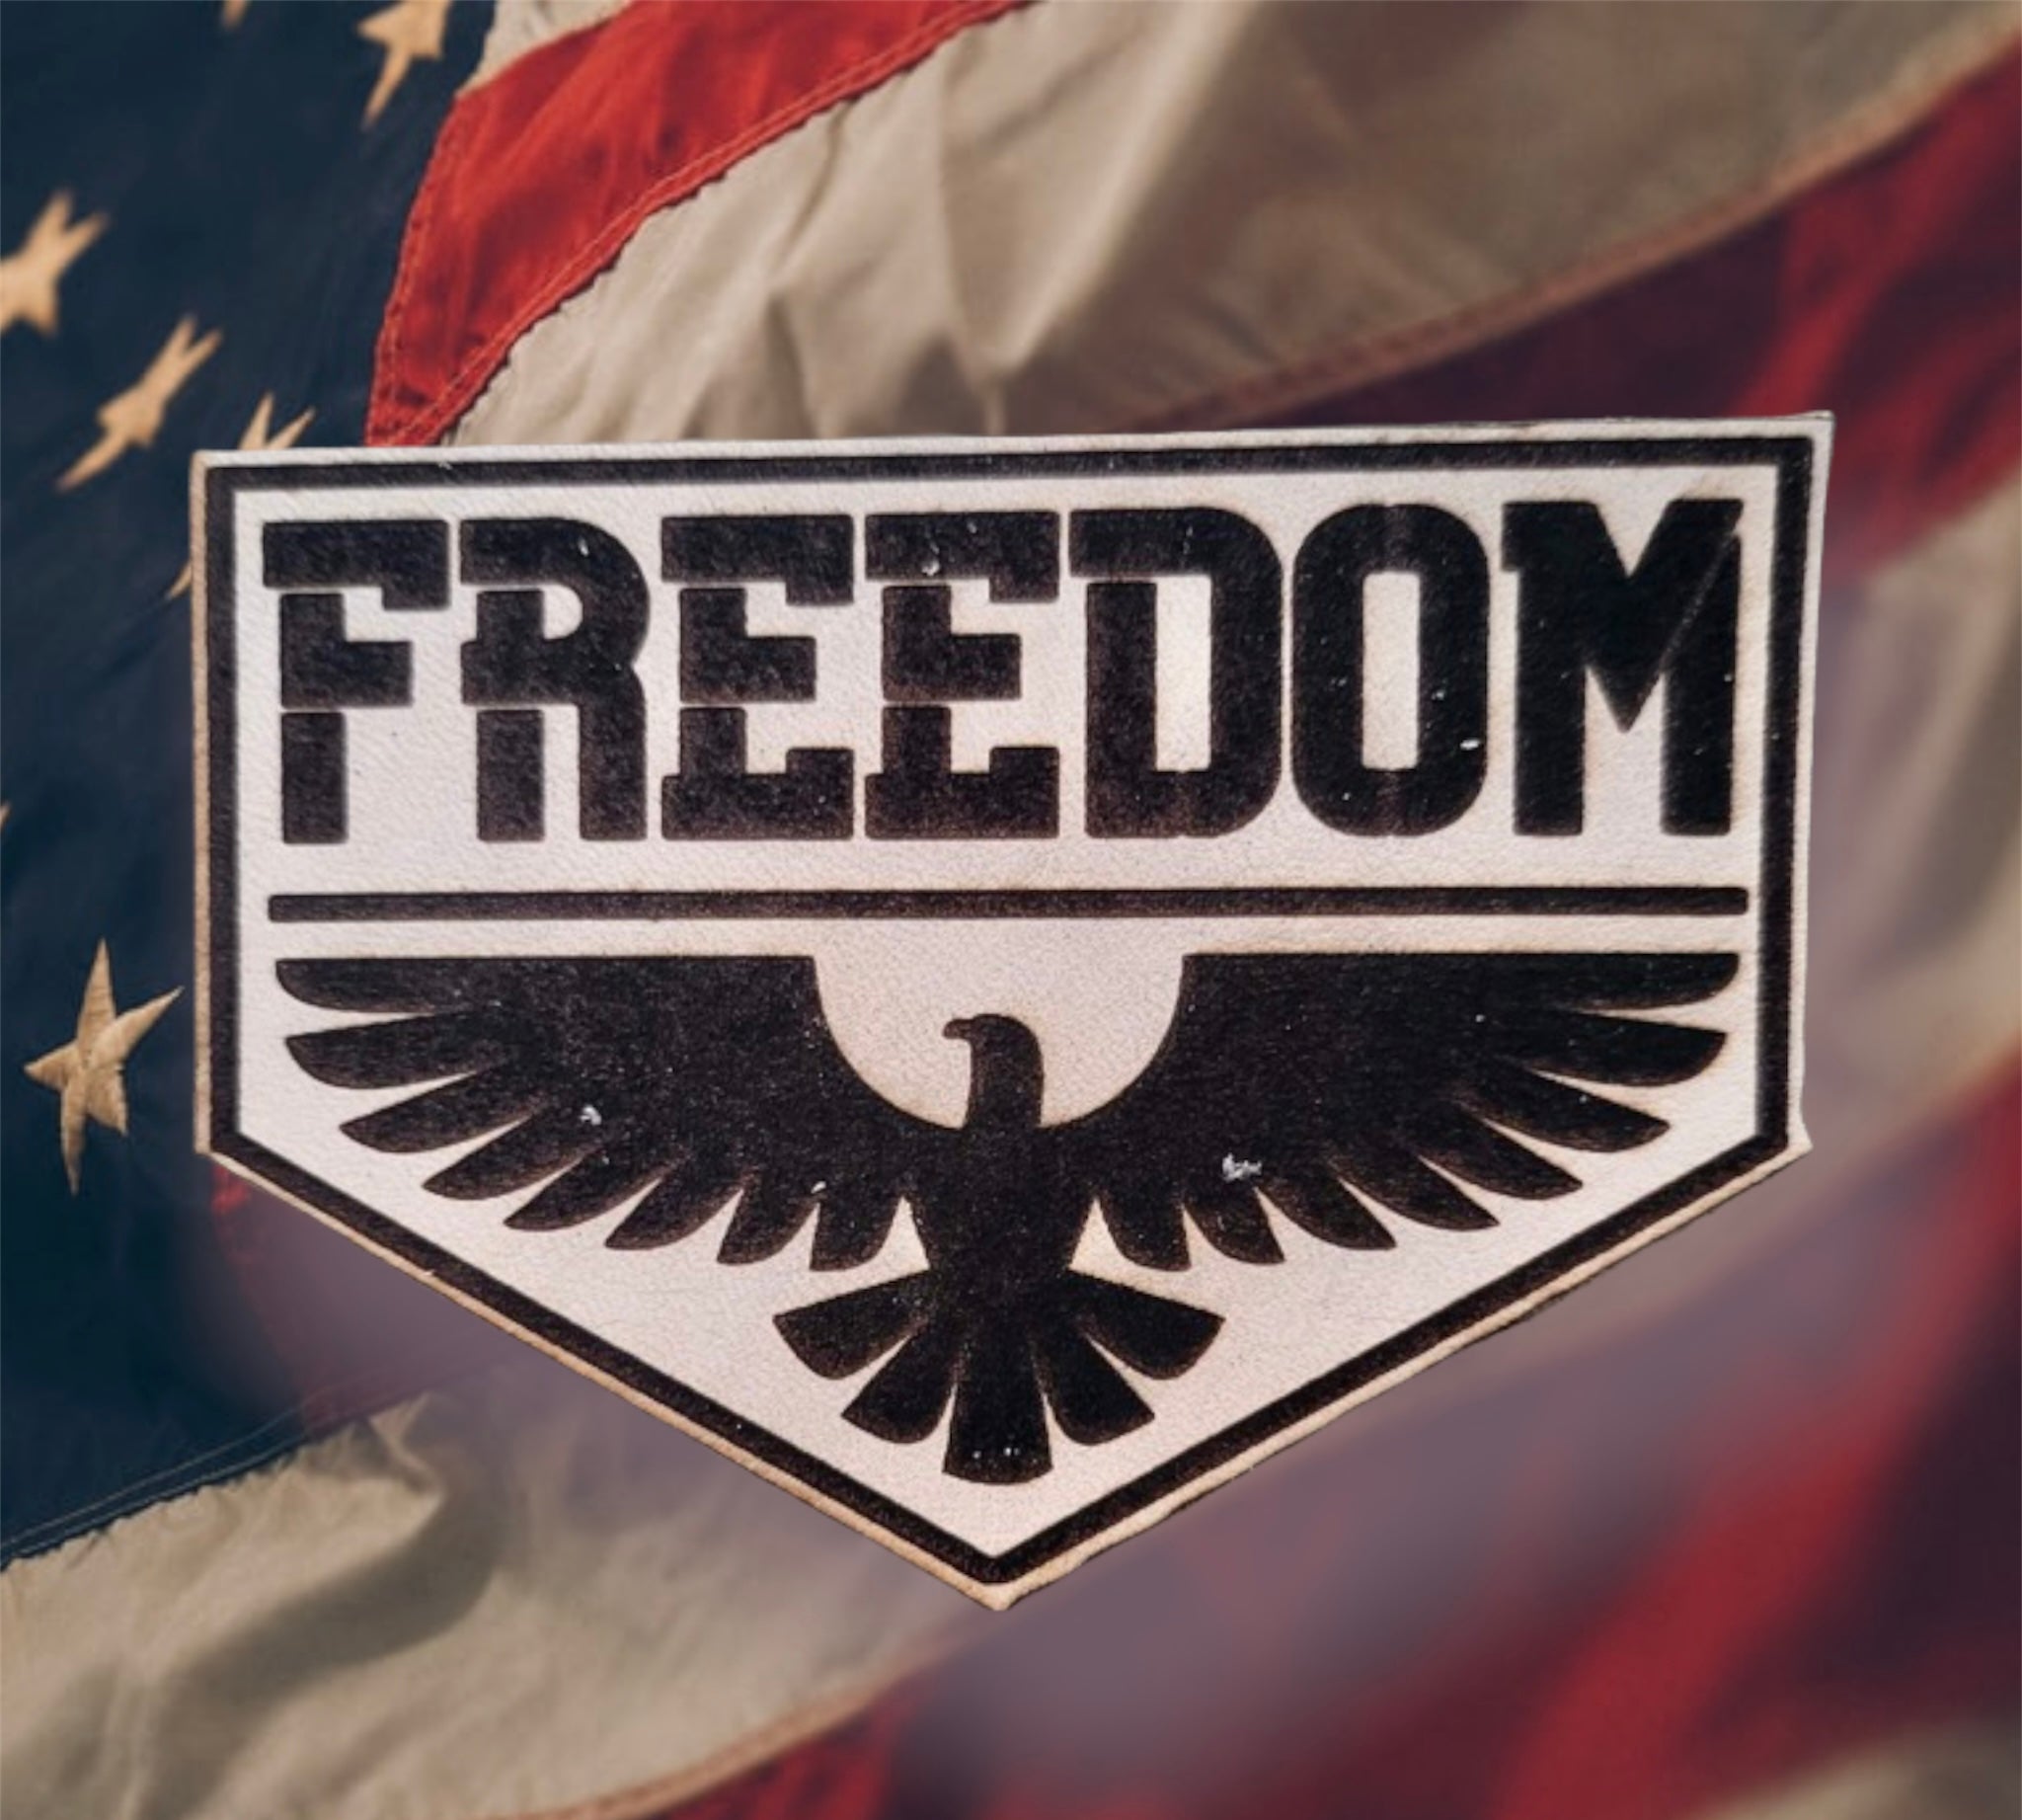 Freedom Leather Patch